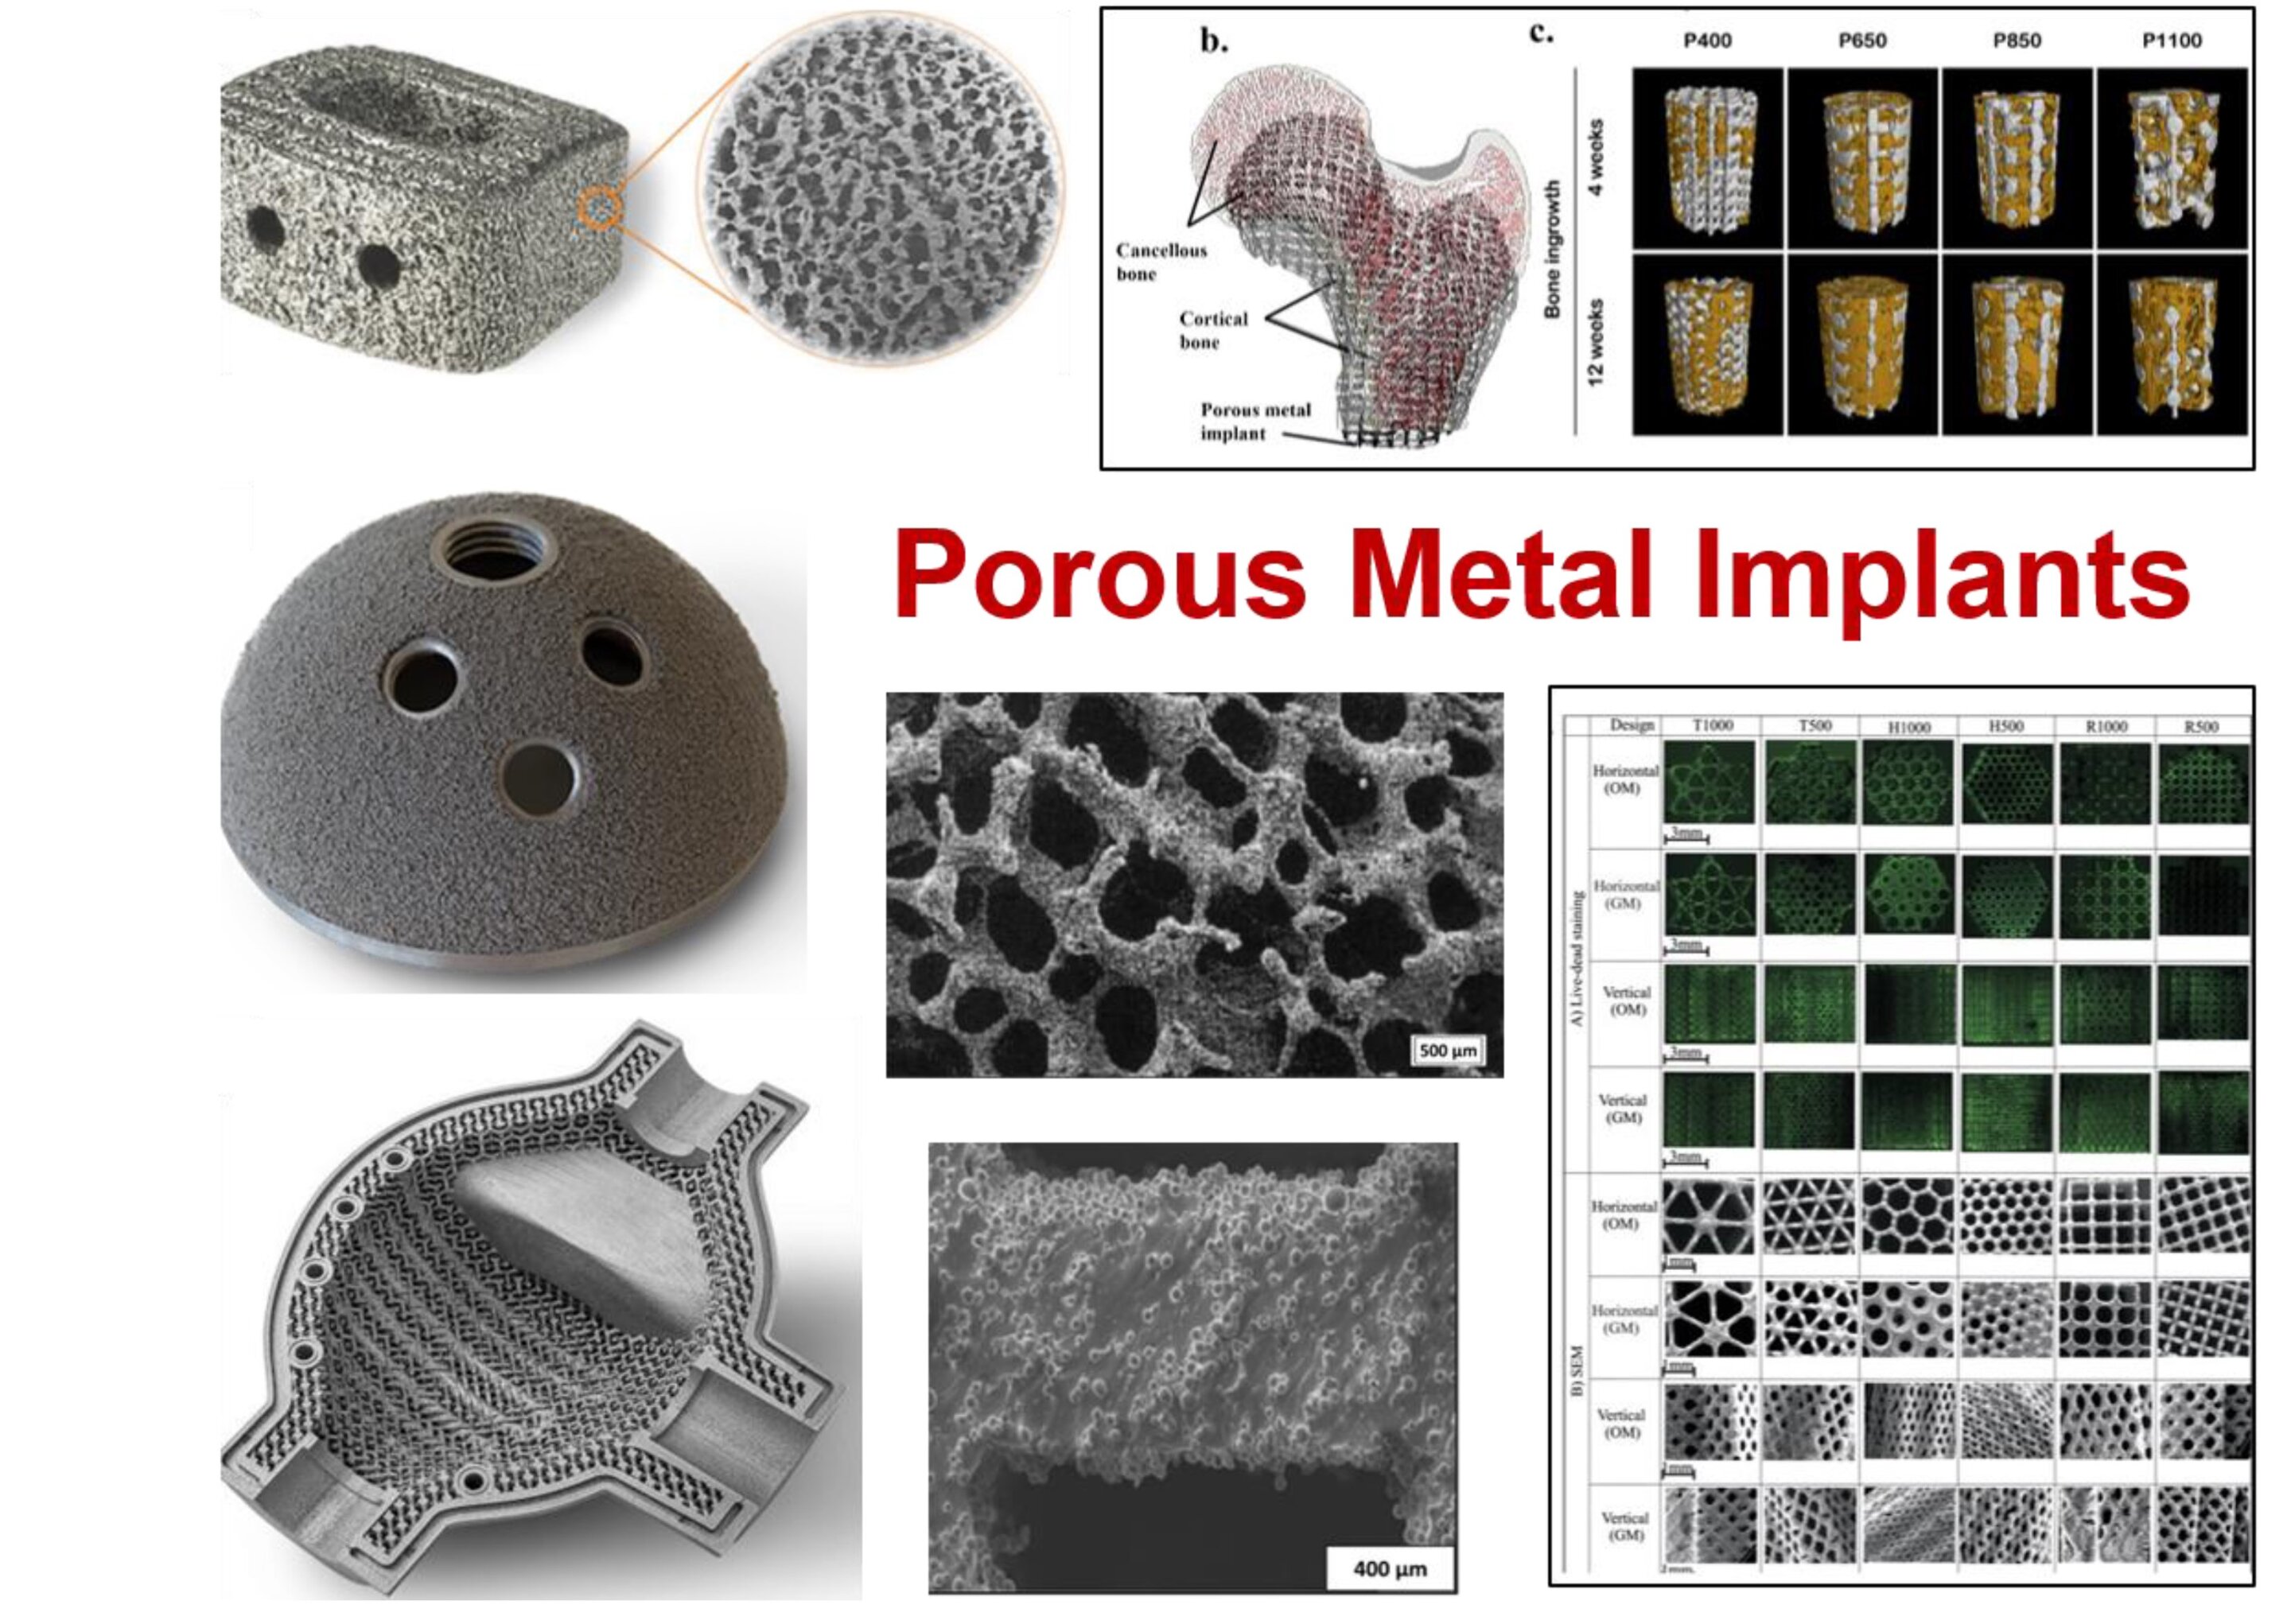 Exploring Porous Metals in Orthopedic Implants and Beyond: An Investigation